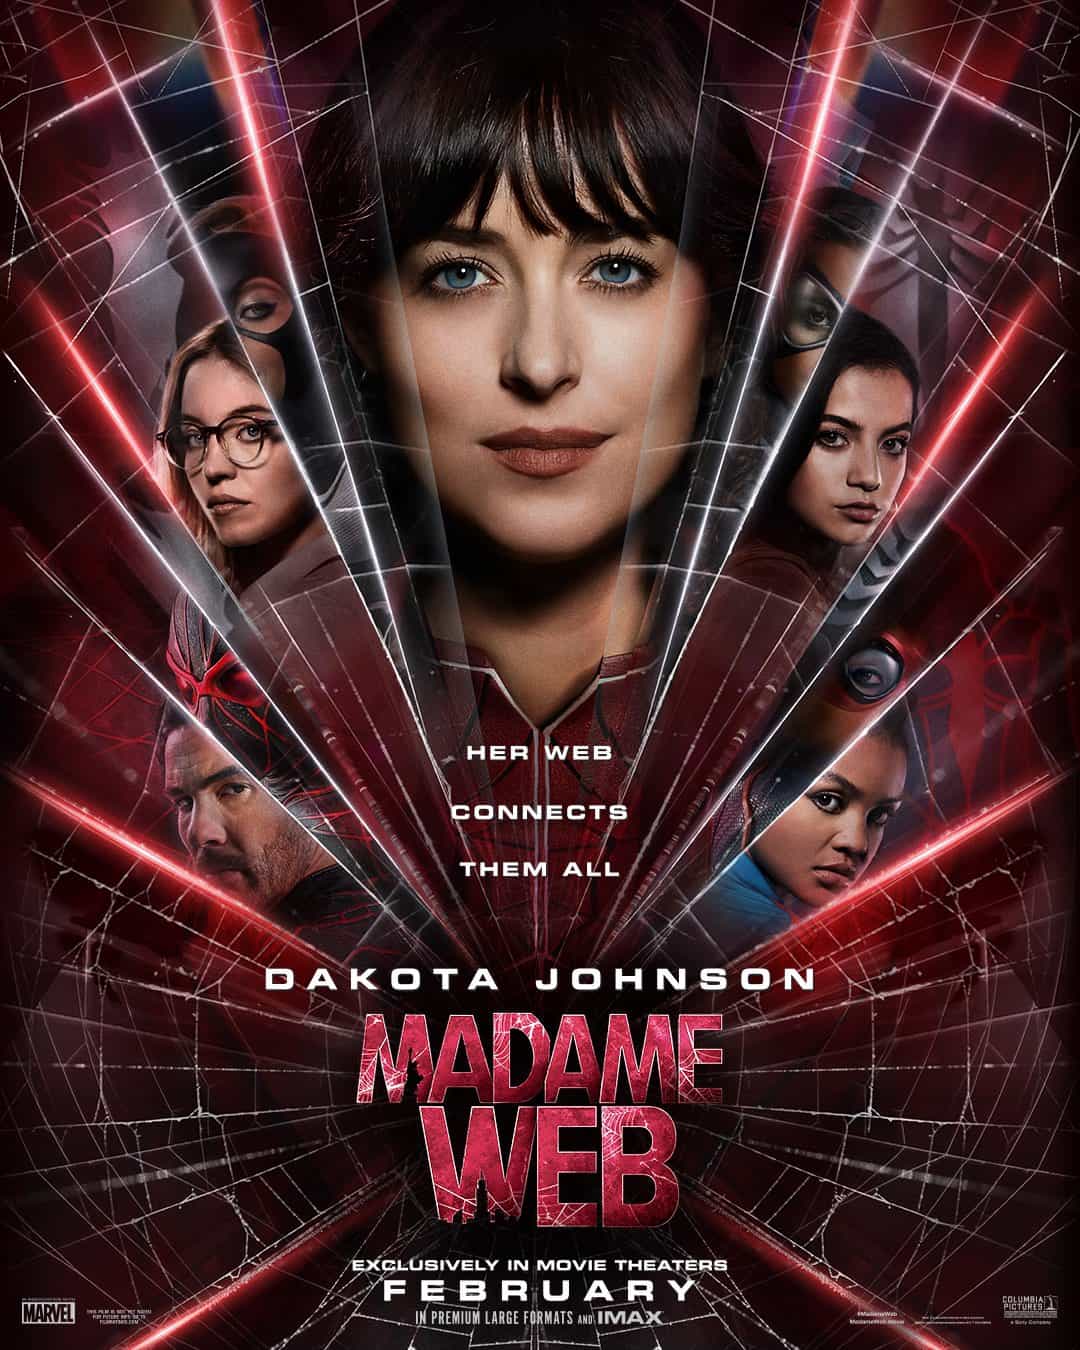 Check out the new poster for upcoming movie Madame Web which stars Dakota Johnson and Sydney Sweeney - movie UK release date 16th February 2024 #madameweb